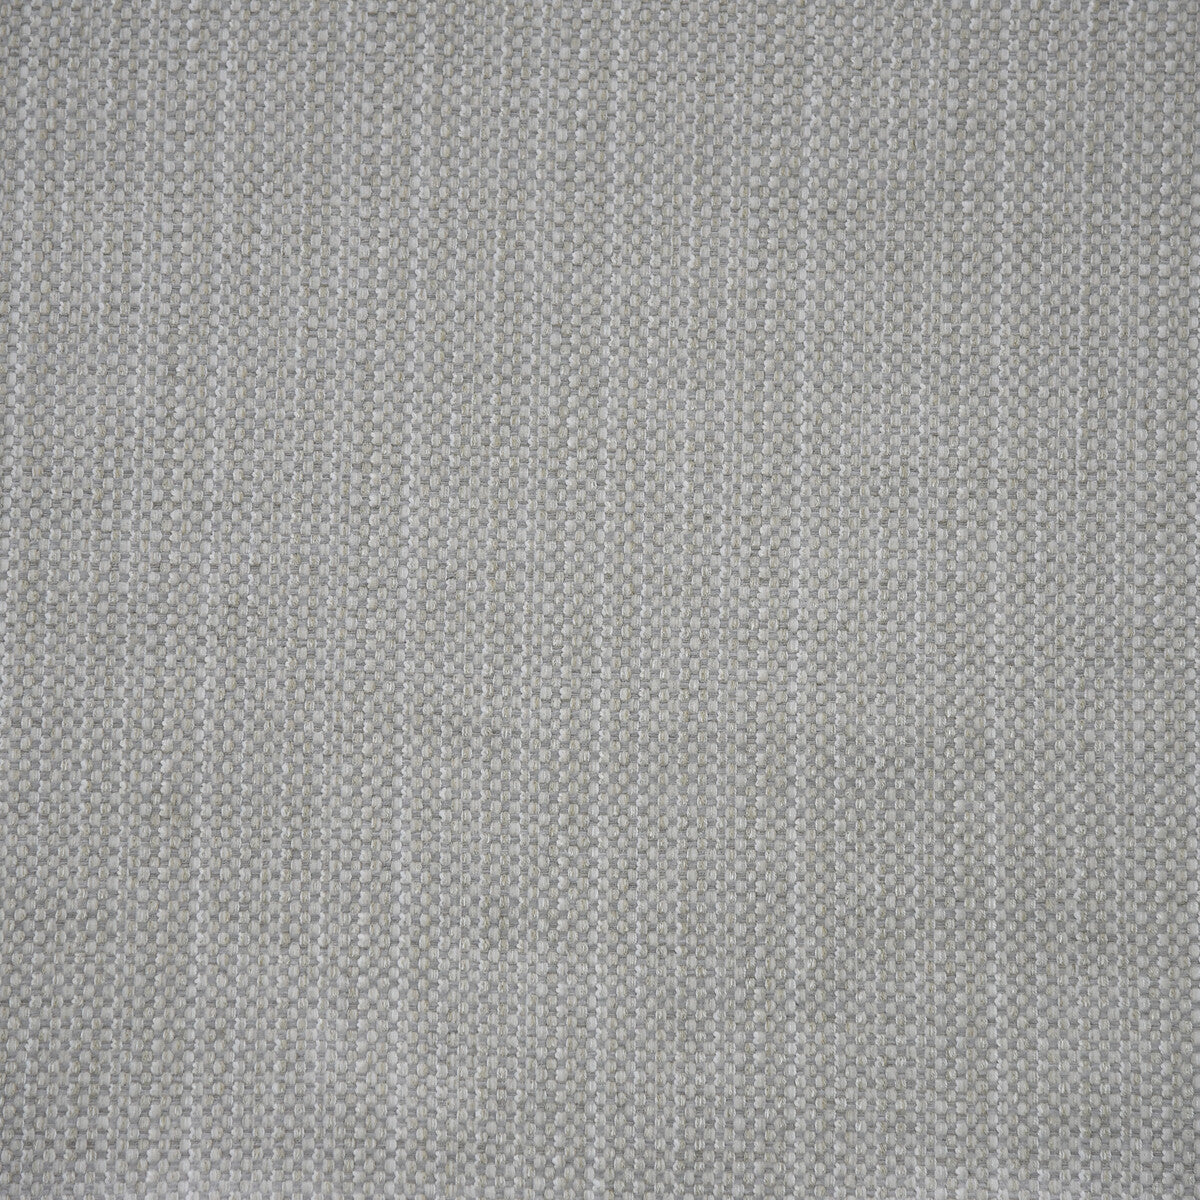 Tried And True fabric in ice color - pattern 34464.16.0 - by Kravet Couture